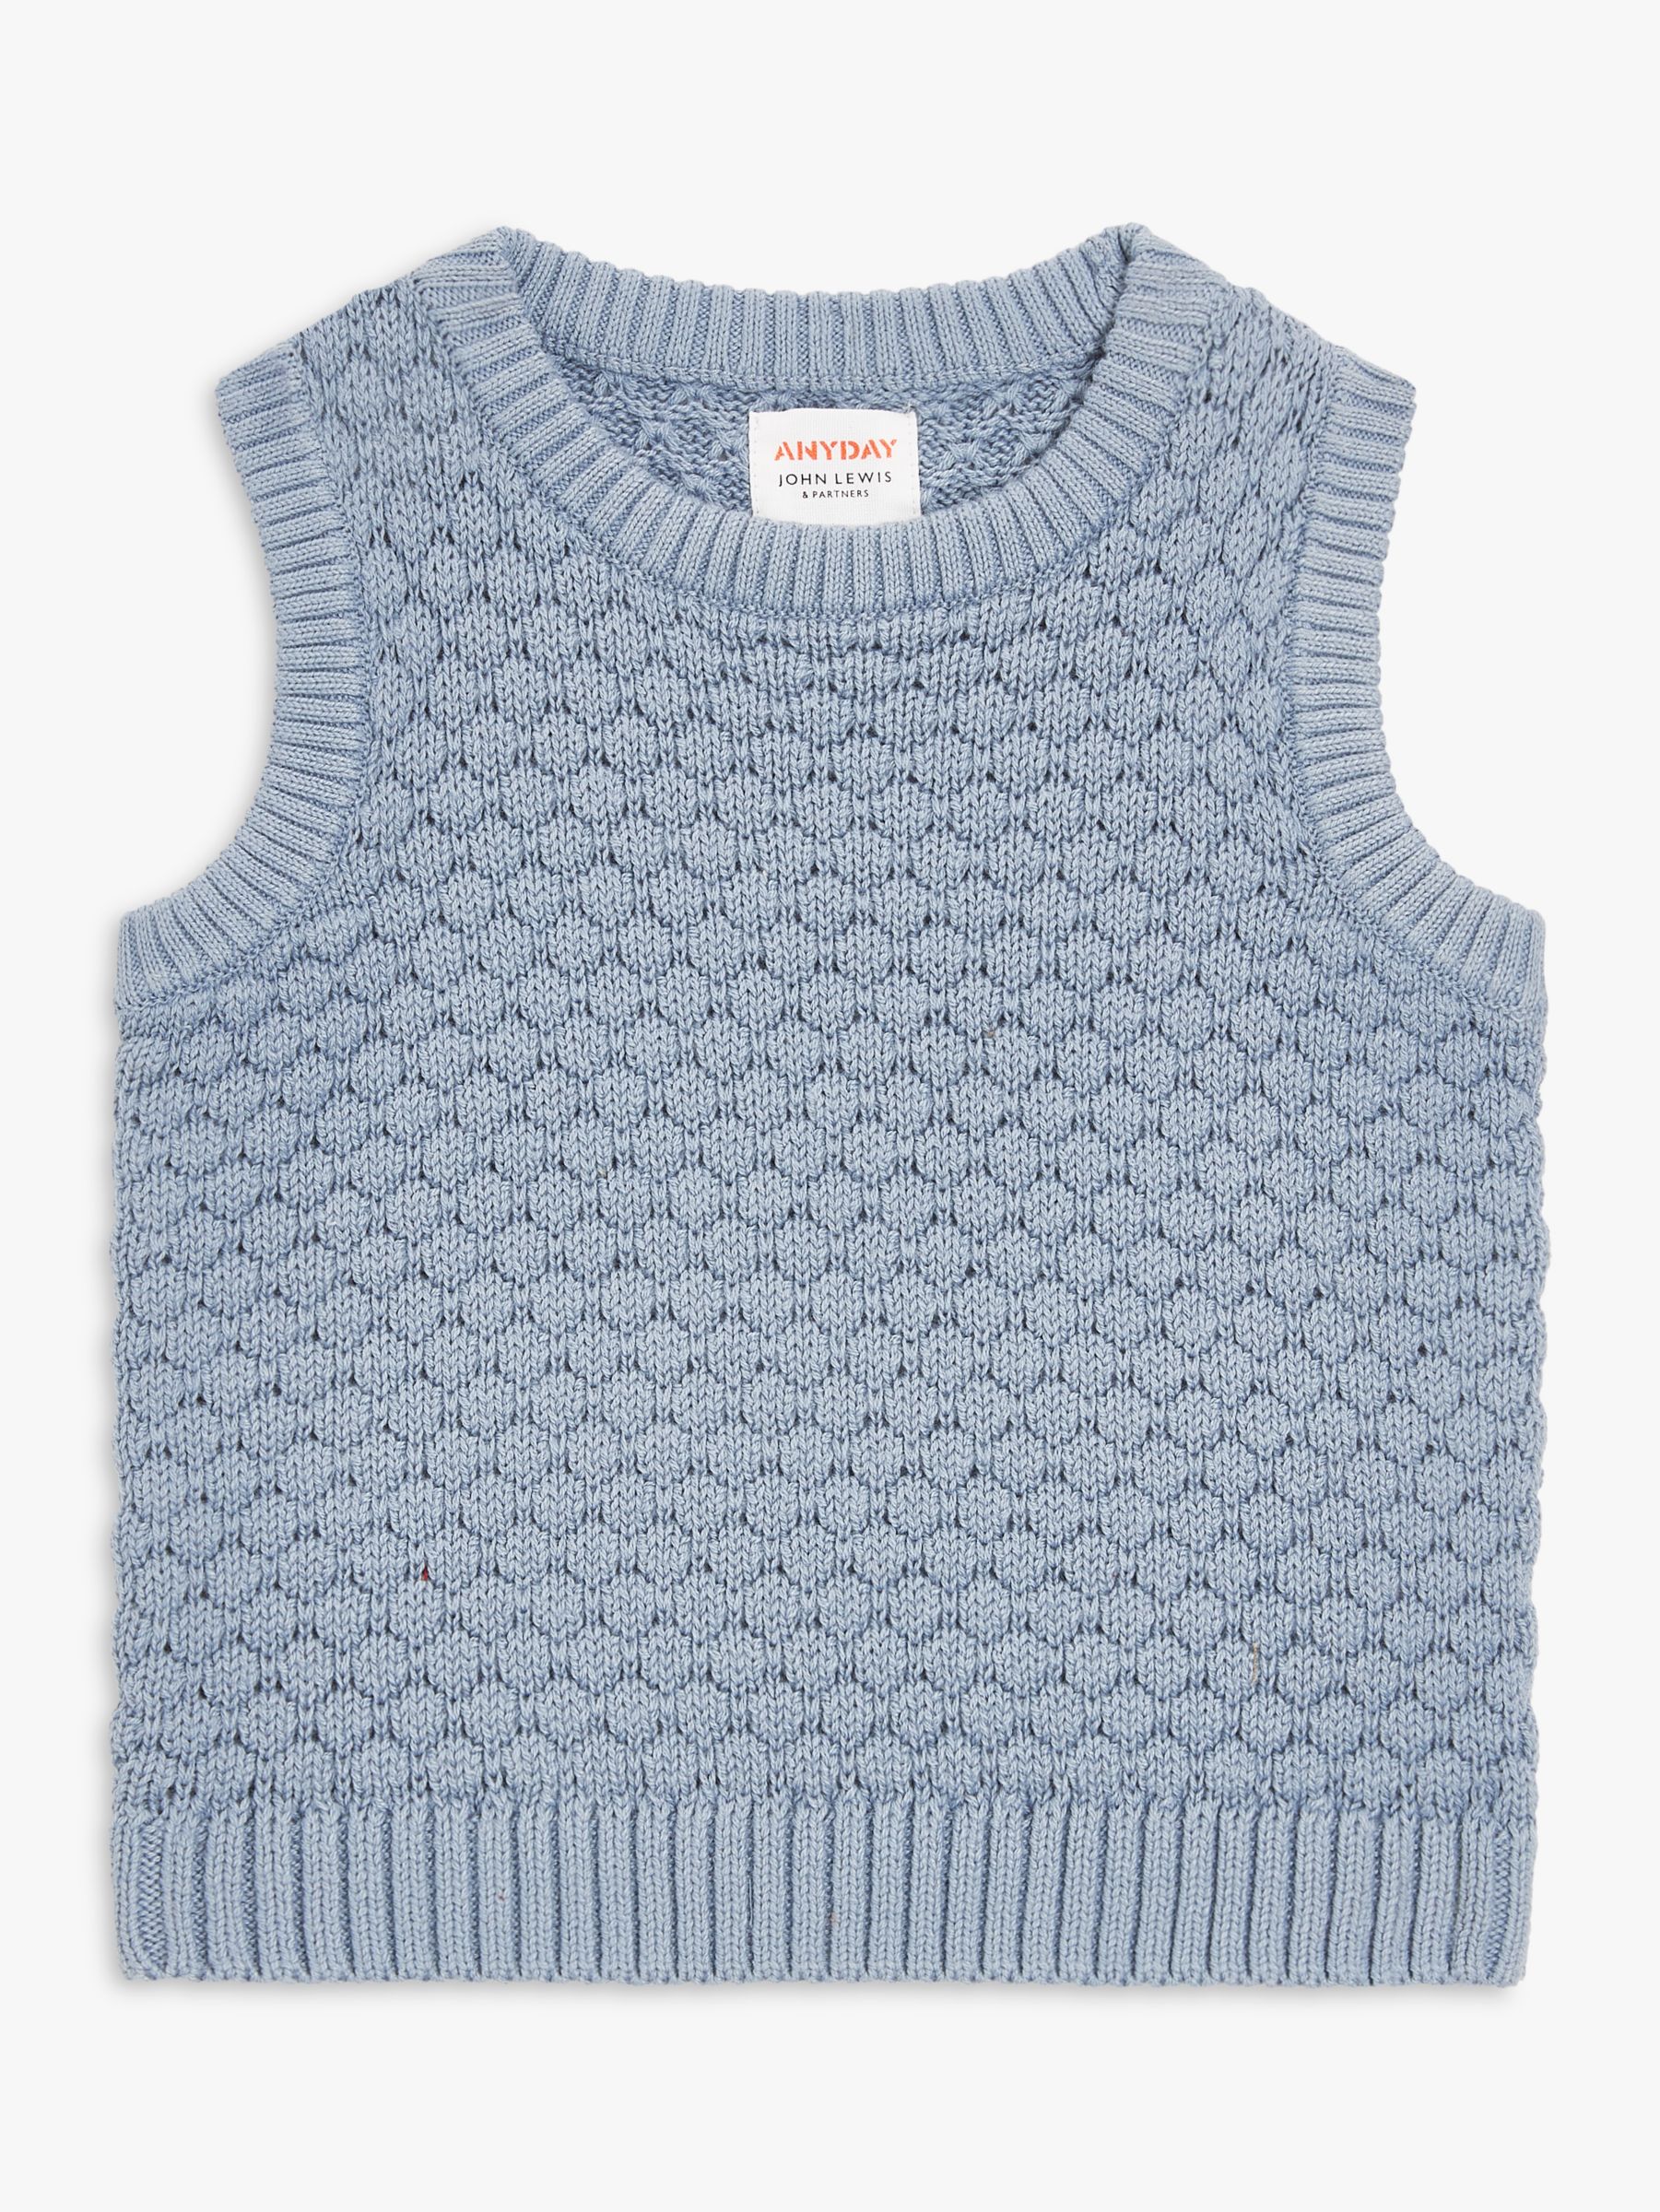 John Lewis ANYDAY Baby Circle Knit Vest, Blue, 3-6 months